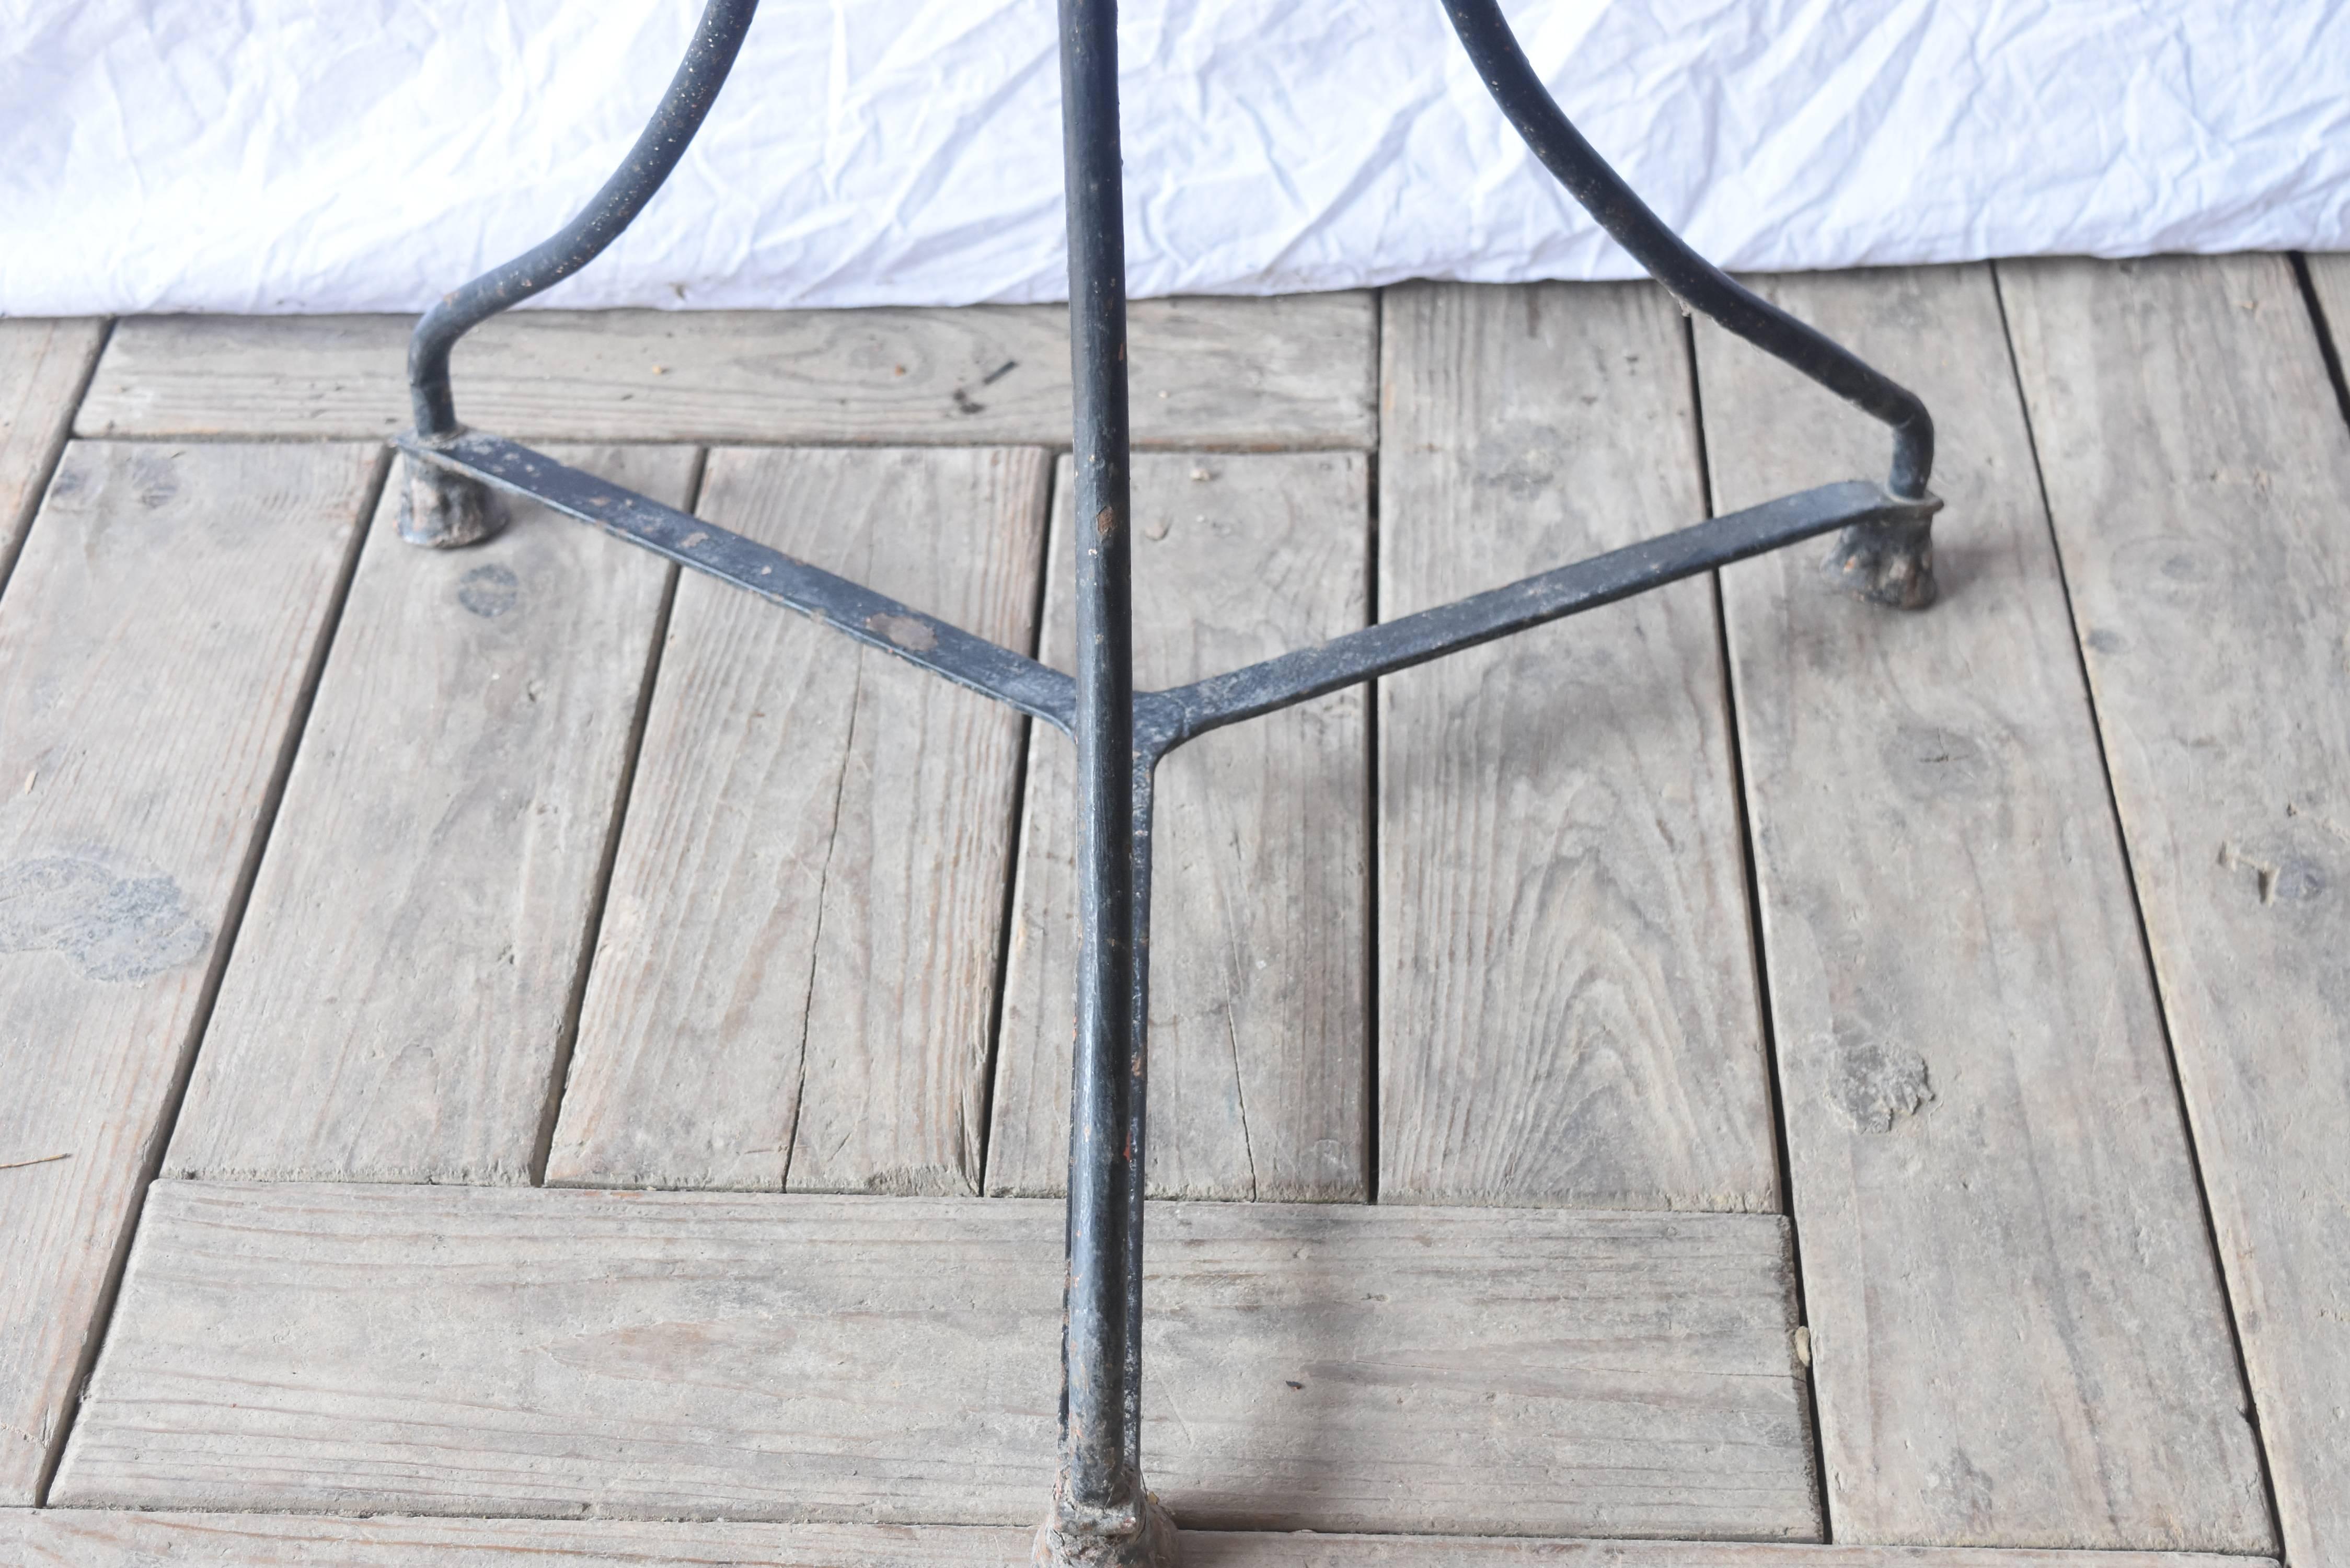 Late 19th Century French Iron Bistro Table Painted Black with White Marble Top (Französisch)